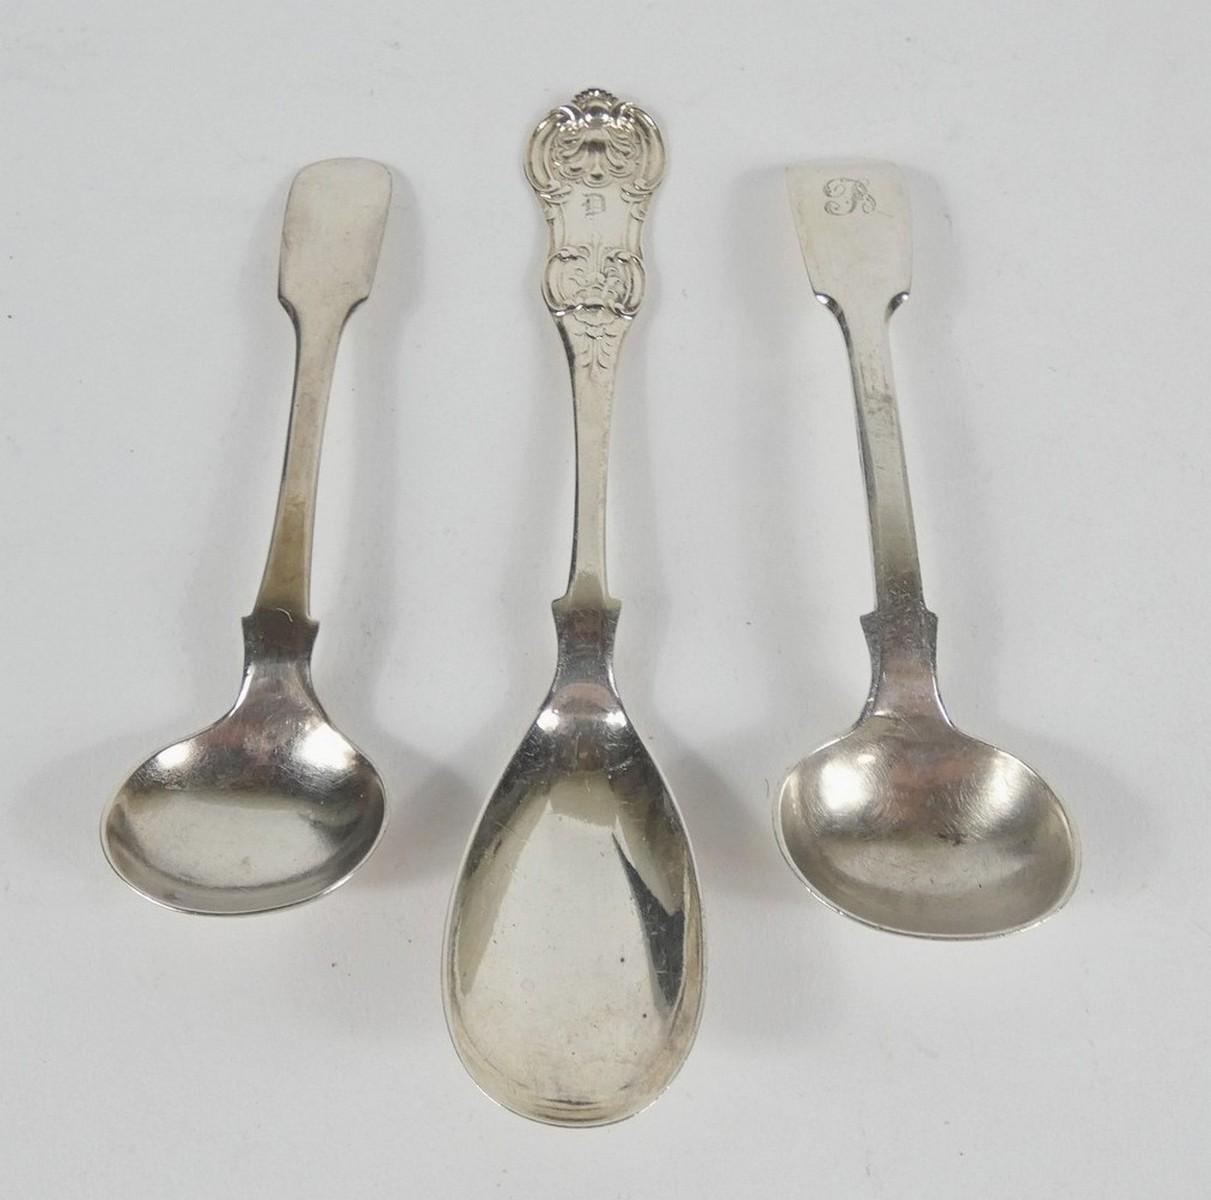 3 STERLING CONDIMENT SPOONS